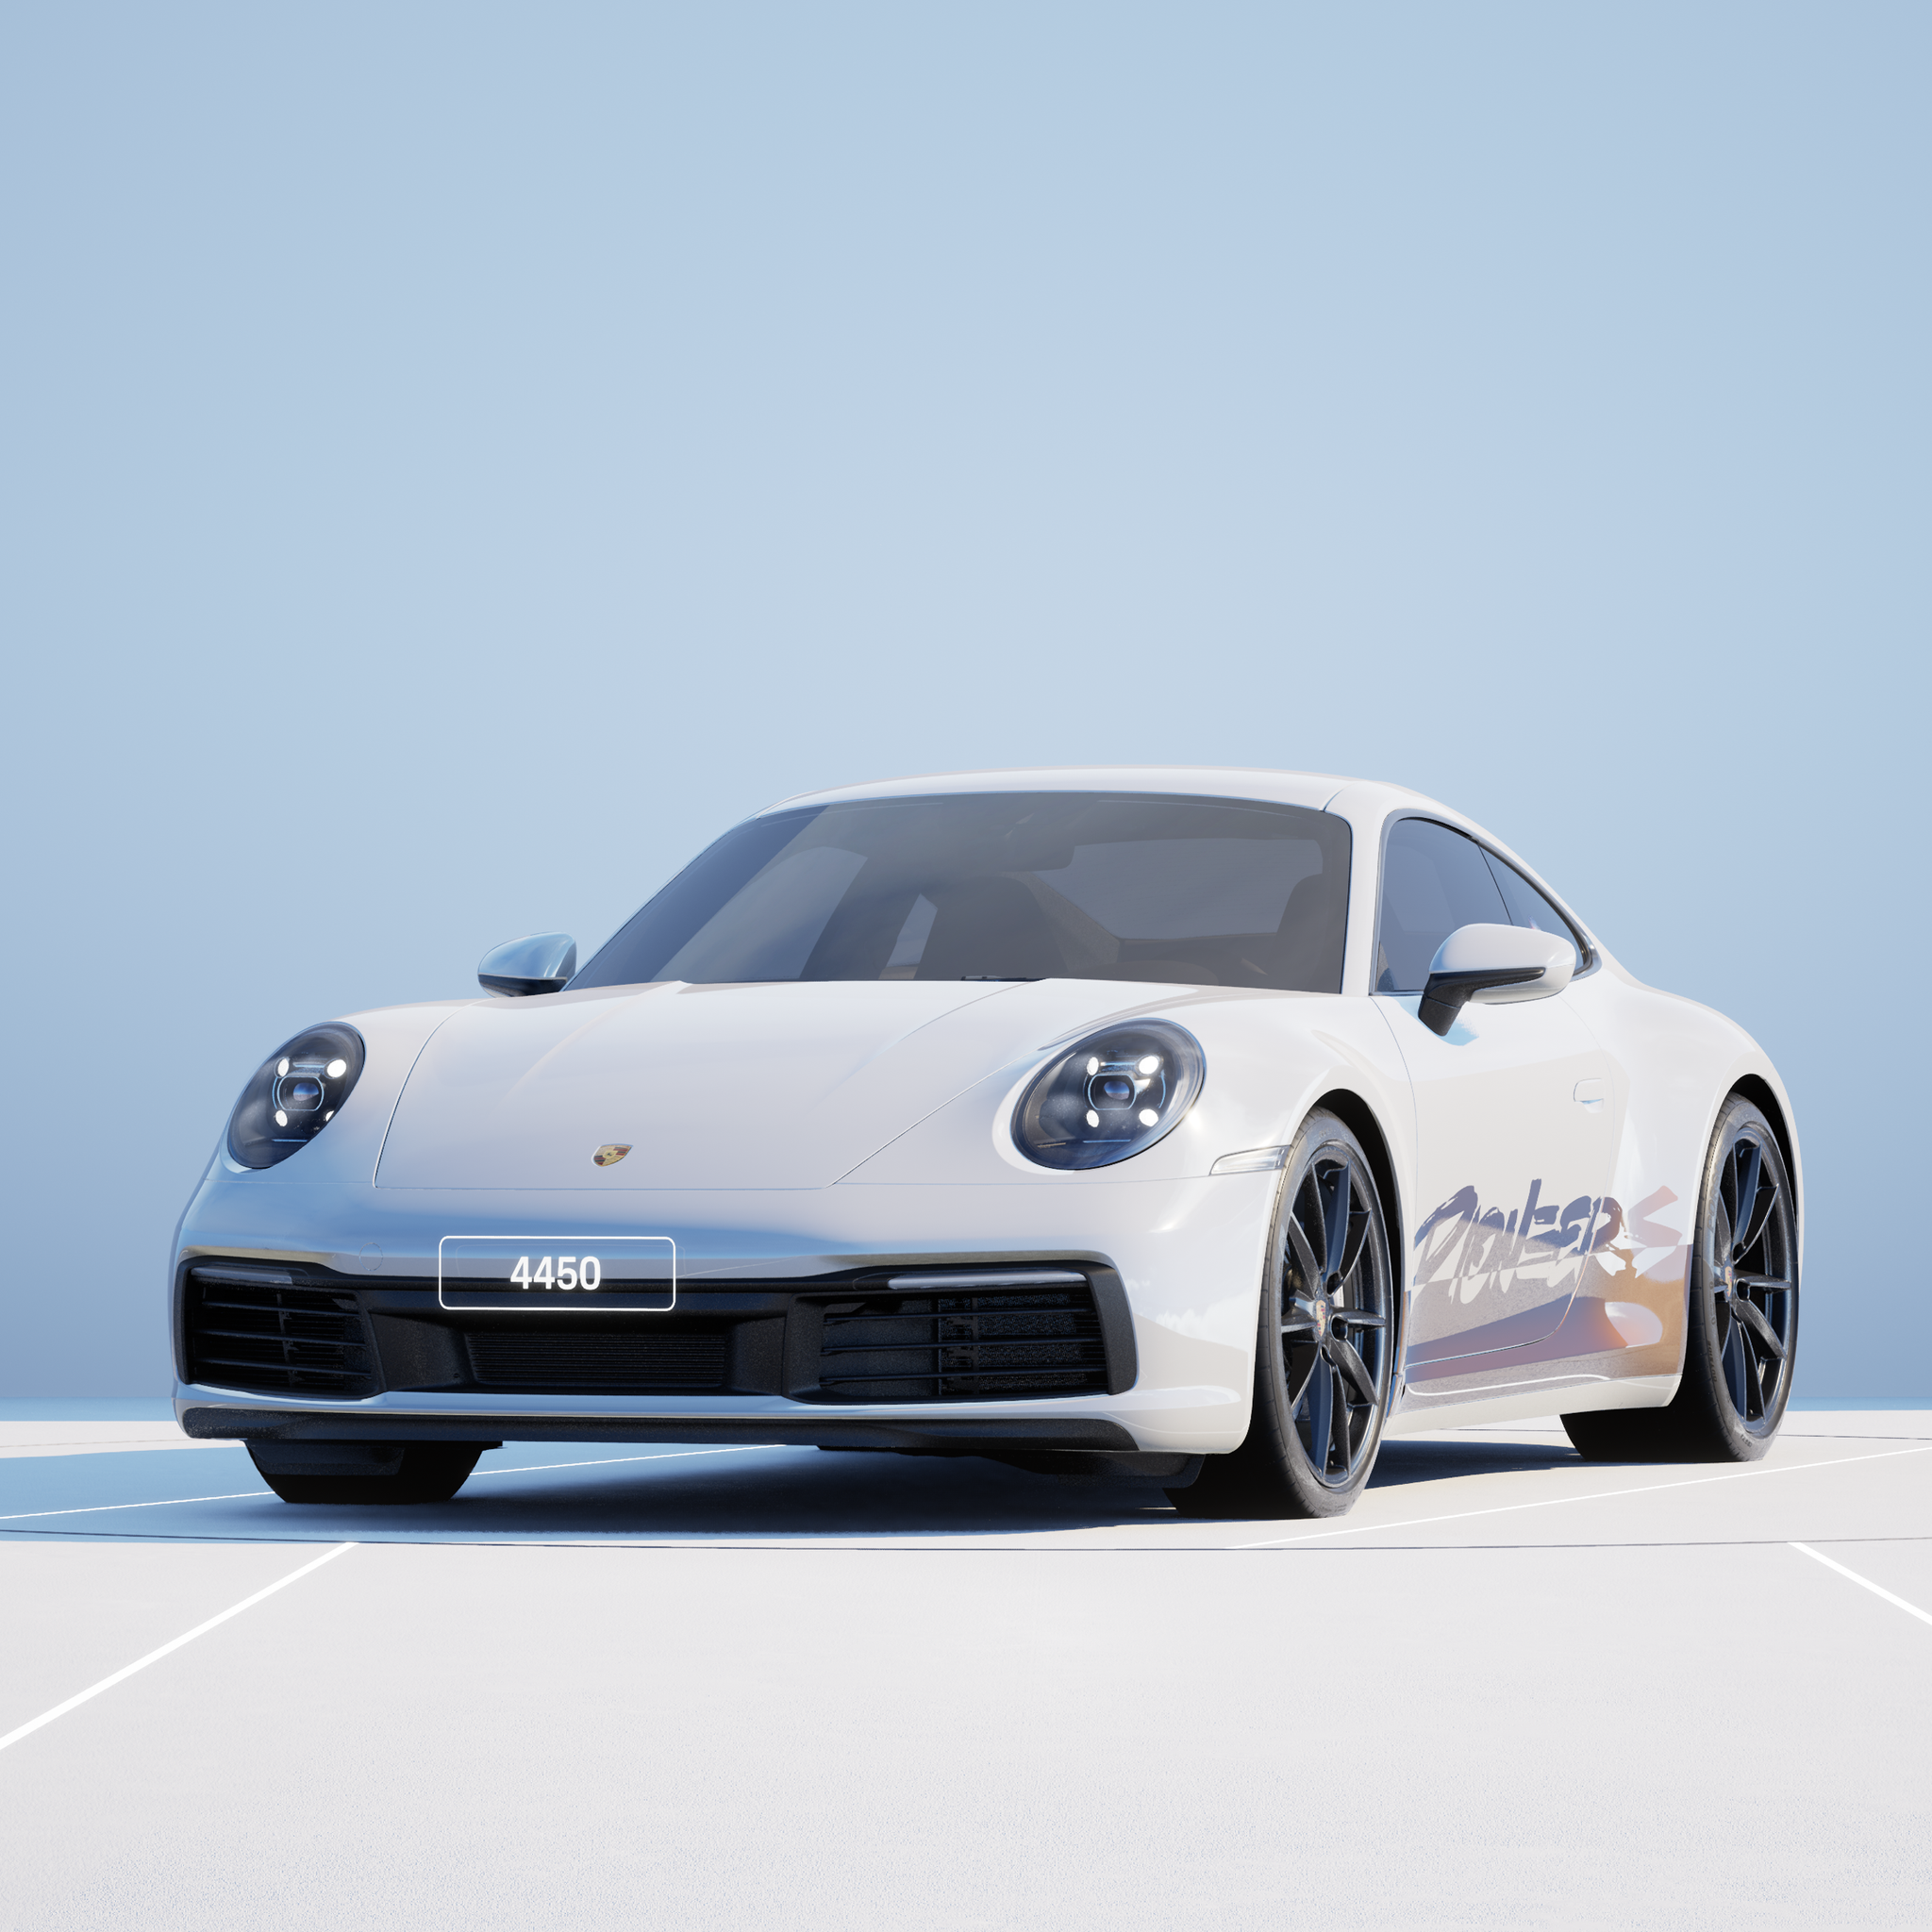 The PORSCHΞ 911 4450 image in phase